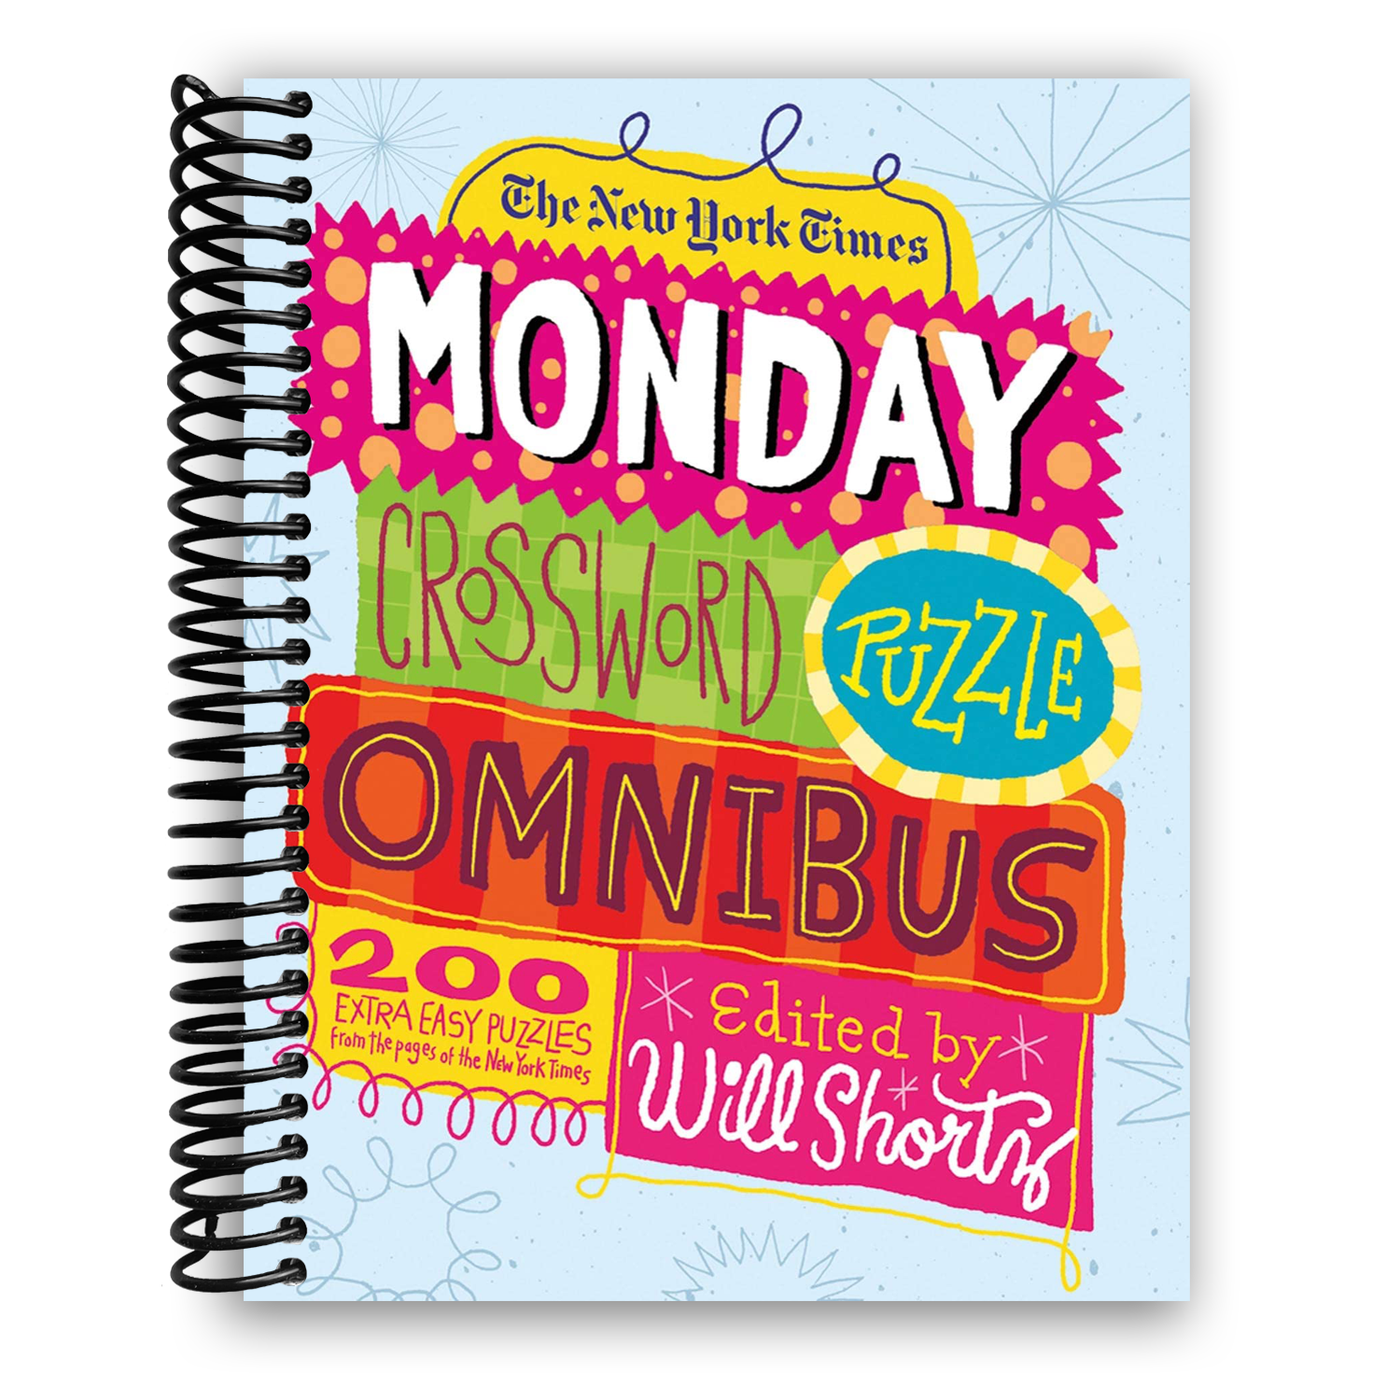 The New York Times Monday Crossword Puzzle Omnibus: 200 Solvable Puzzles from the Pages of The New York Times (Spiral Bound)